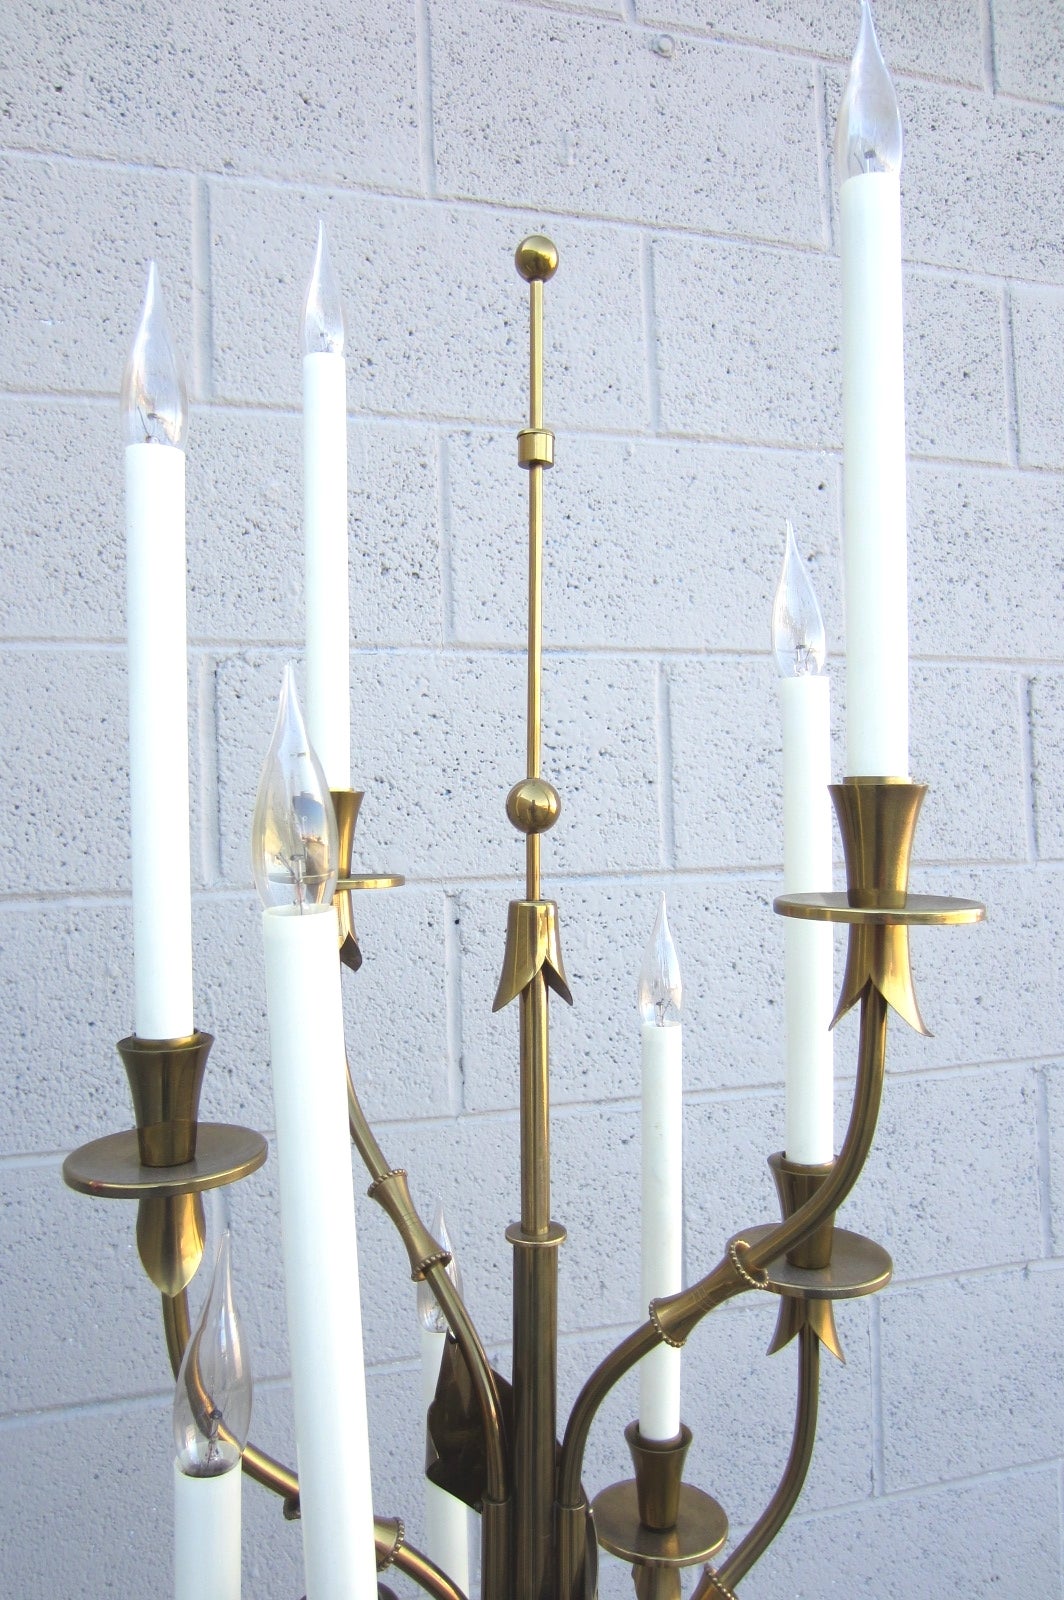 Brass candelabra floor lamp by Stilnovo of Italy, circa 1960s.
Fabulous piece of functional art. 11 candlestick bulb sockets.
Exceptional golden aged brass with pure white Italian marble base.
Stands 5-1/2